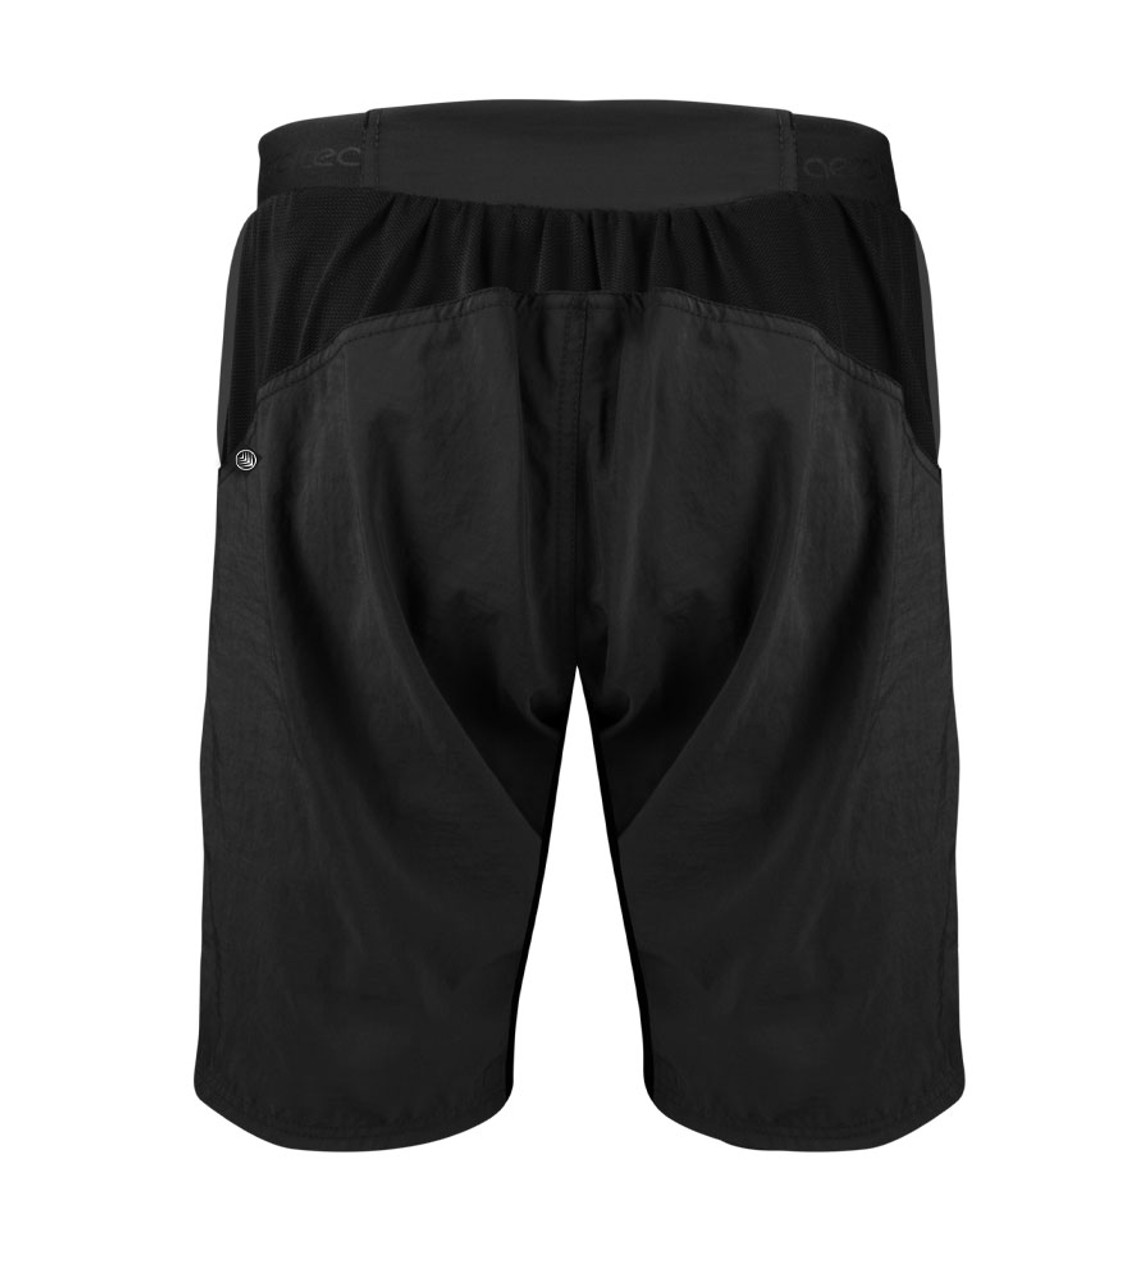 Men's USA Mountain Bike Short - Two parts with a padded liner